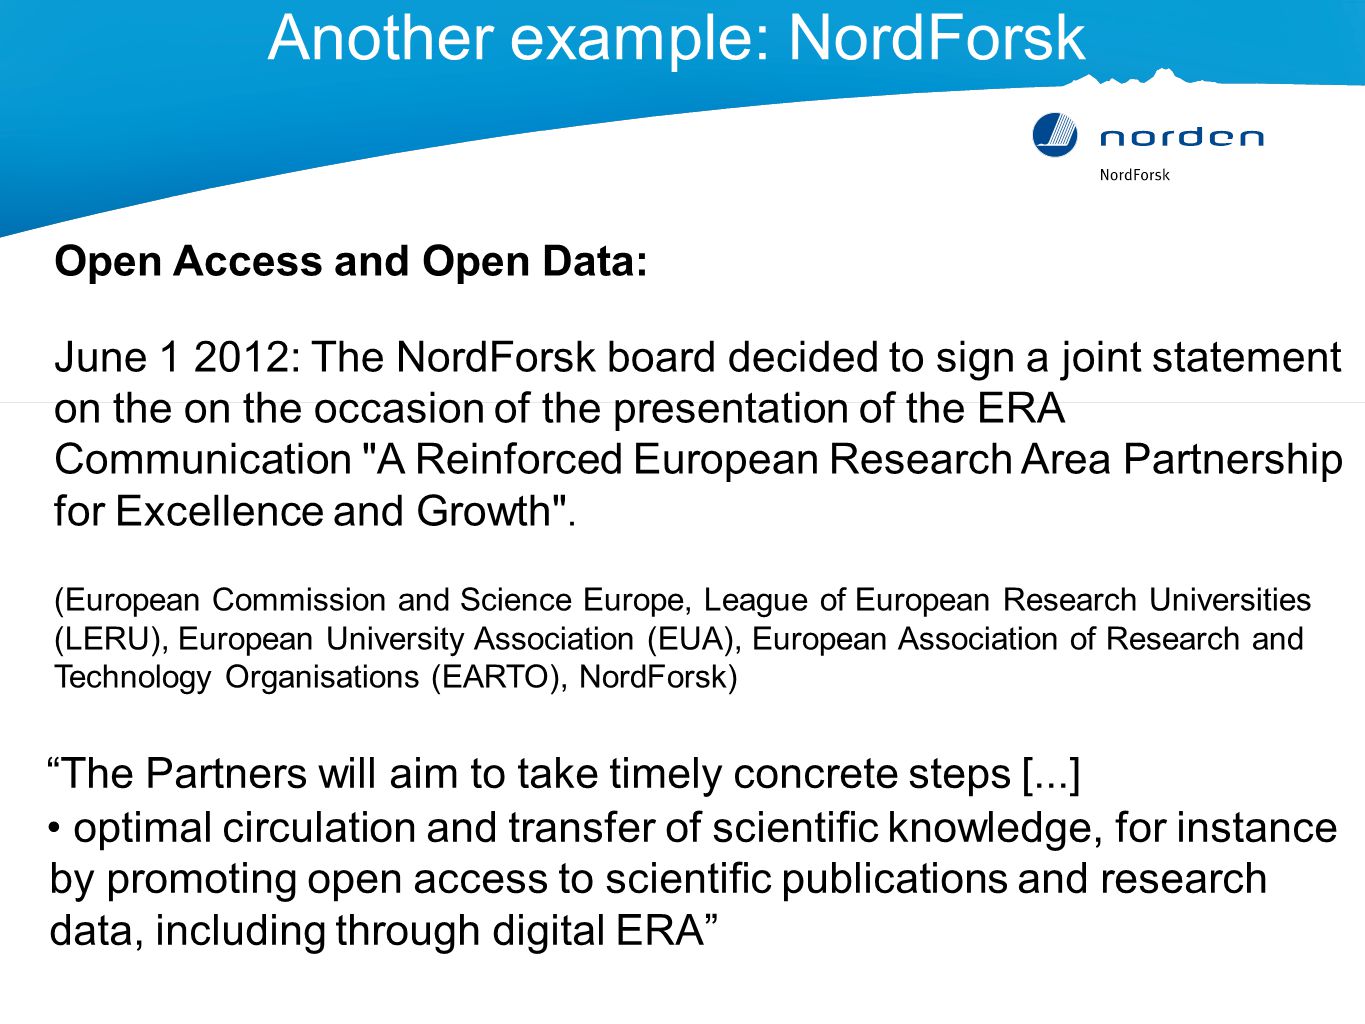 Another example: NordForsk The Partners will aim to take timely concrete steps [...] optimal circulation and transfer of scientific knowledge, for instance by promoting open access to scientific publications and research data, including through digital ERA Open Access and Open Data: June : The NordForsk board decided to sign a joint statement on the on the occasion of the presentation of the ERA Communication A Reinforced European Research Area Partnership for Excellence and Growth .